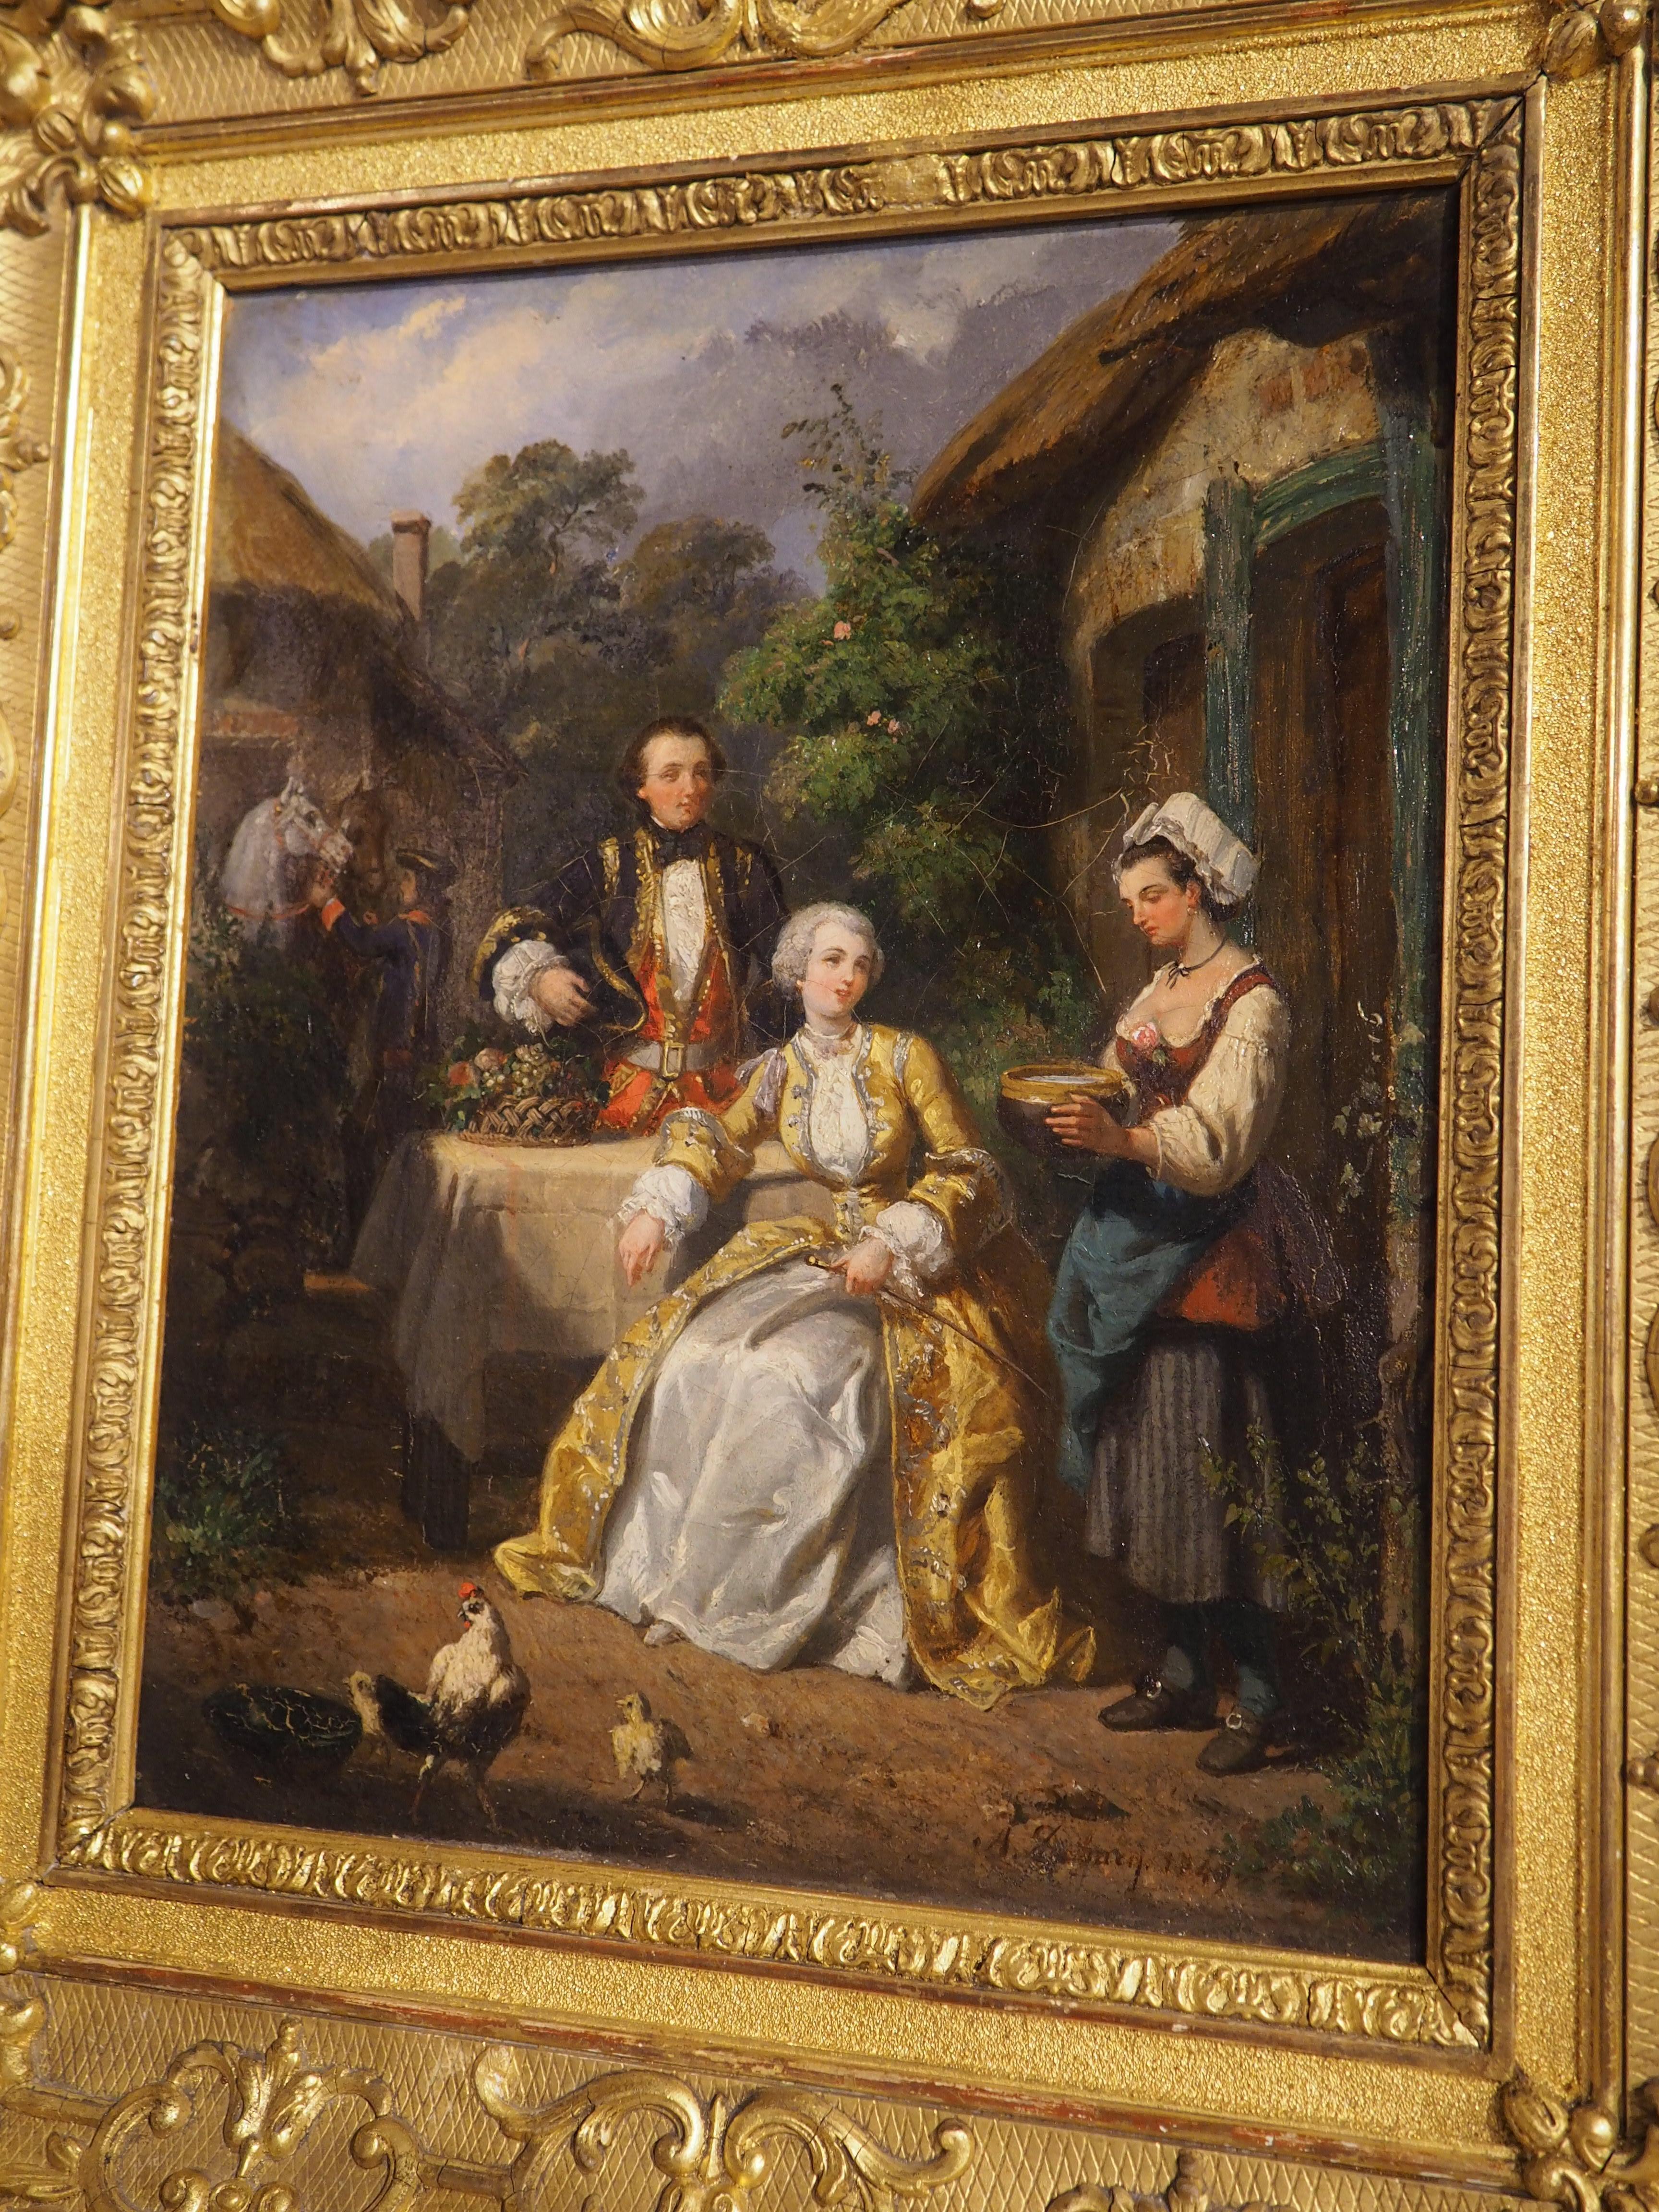 Signed and dated “A. DeBacq 1849” (Charles-Alexandre DeBacq), this charming oil on canvas painting portrays a French noble couple enjoying a snack in the courtyard after an afternoon horseback ride. Surrounded by a highly-carved giltwood frame